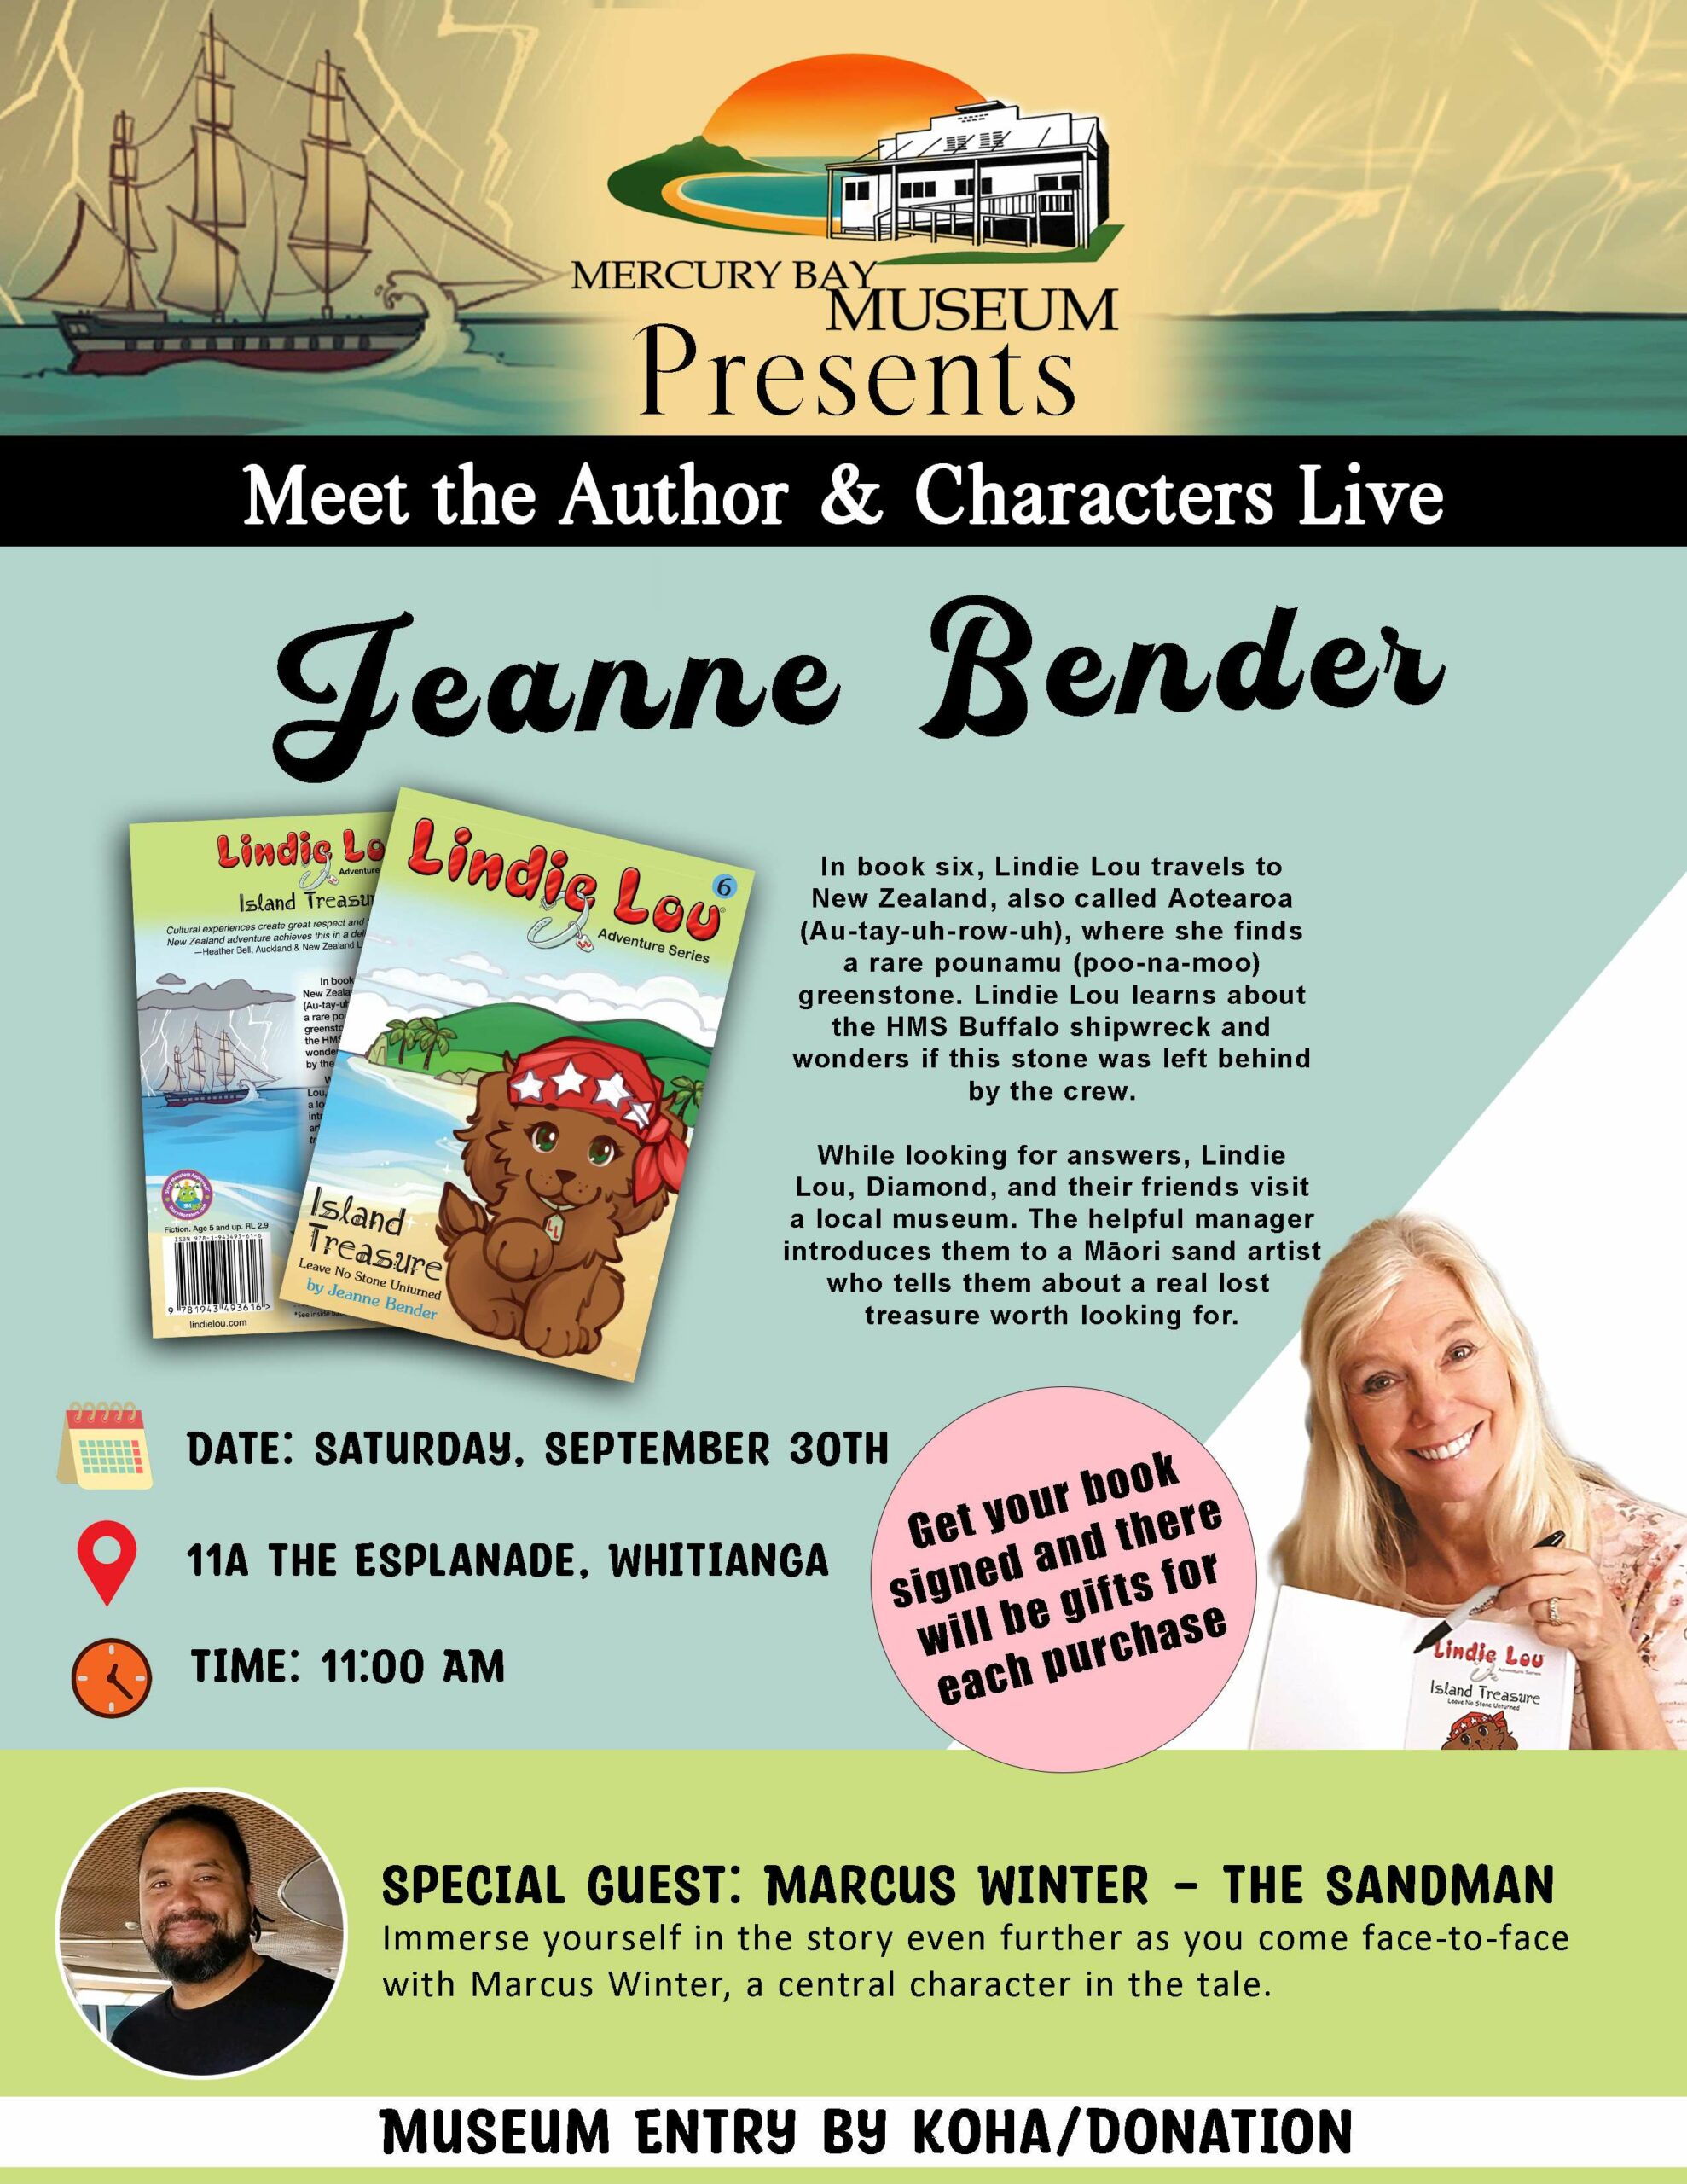 Meet the Author & Characters Live - Jeanne Bender & Marcus Winter